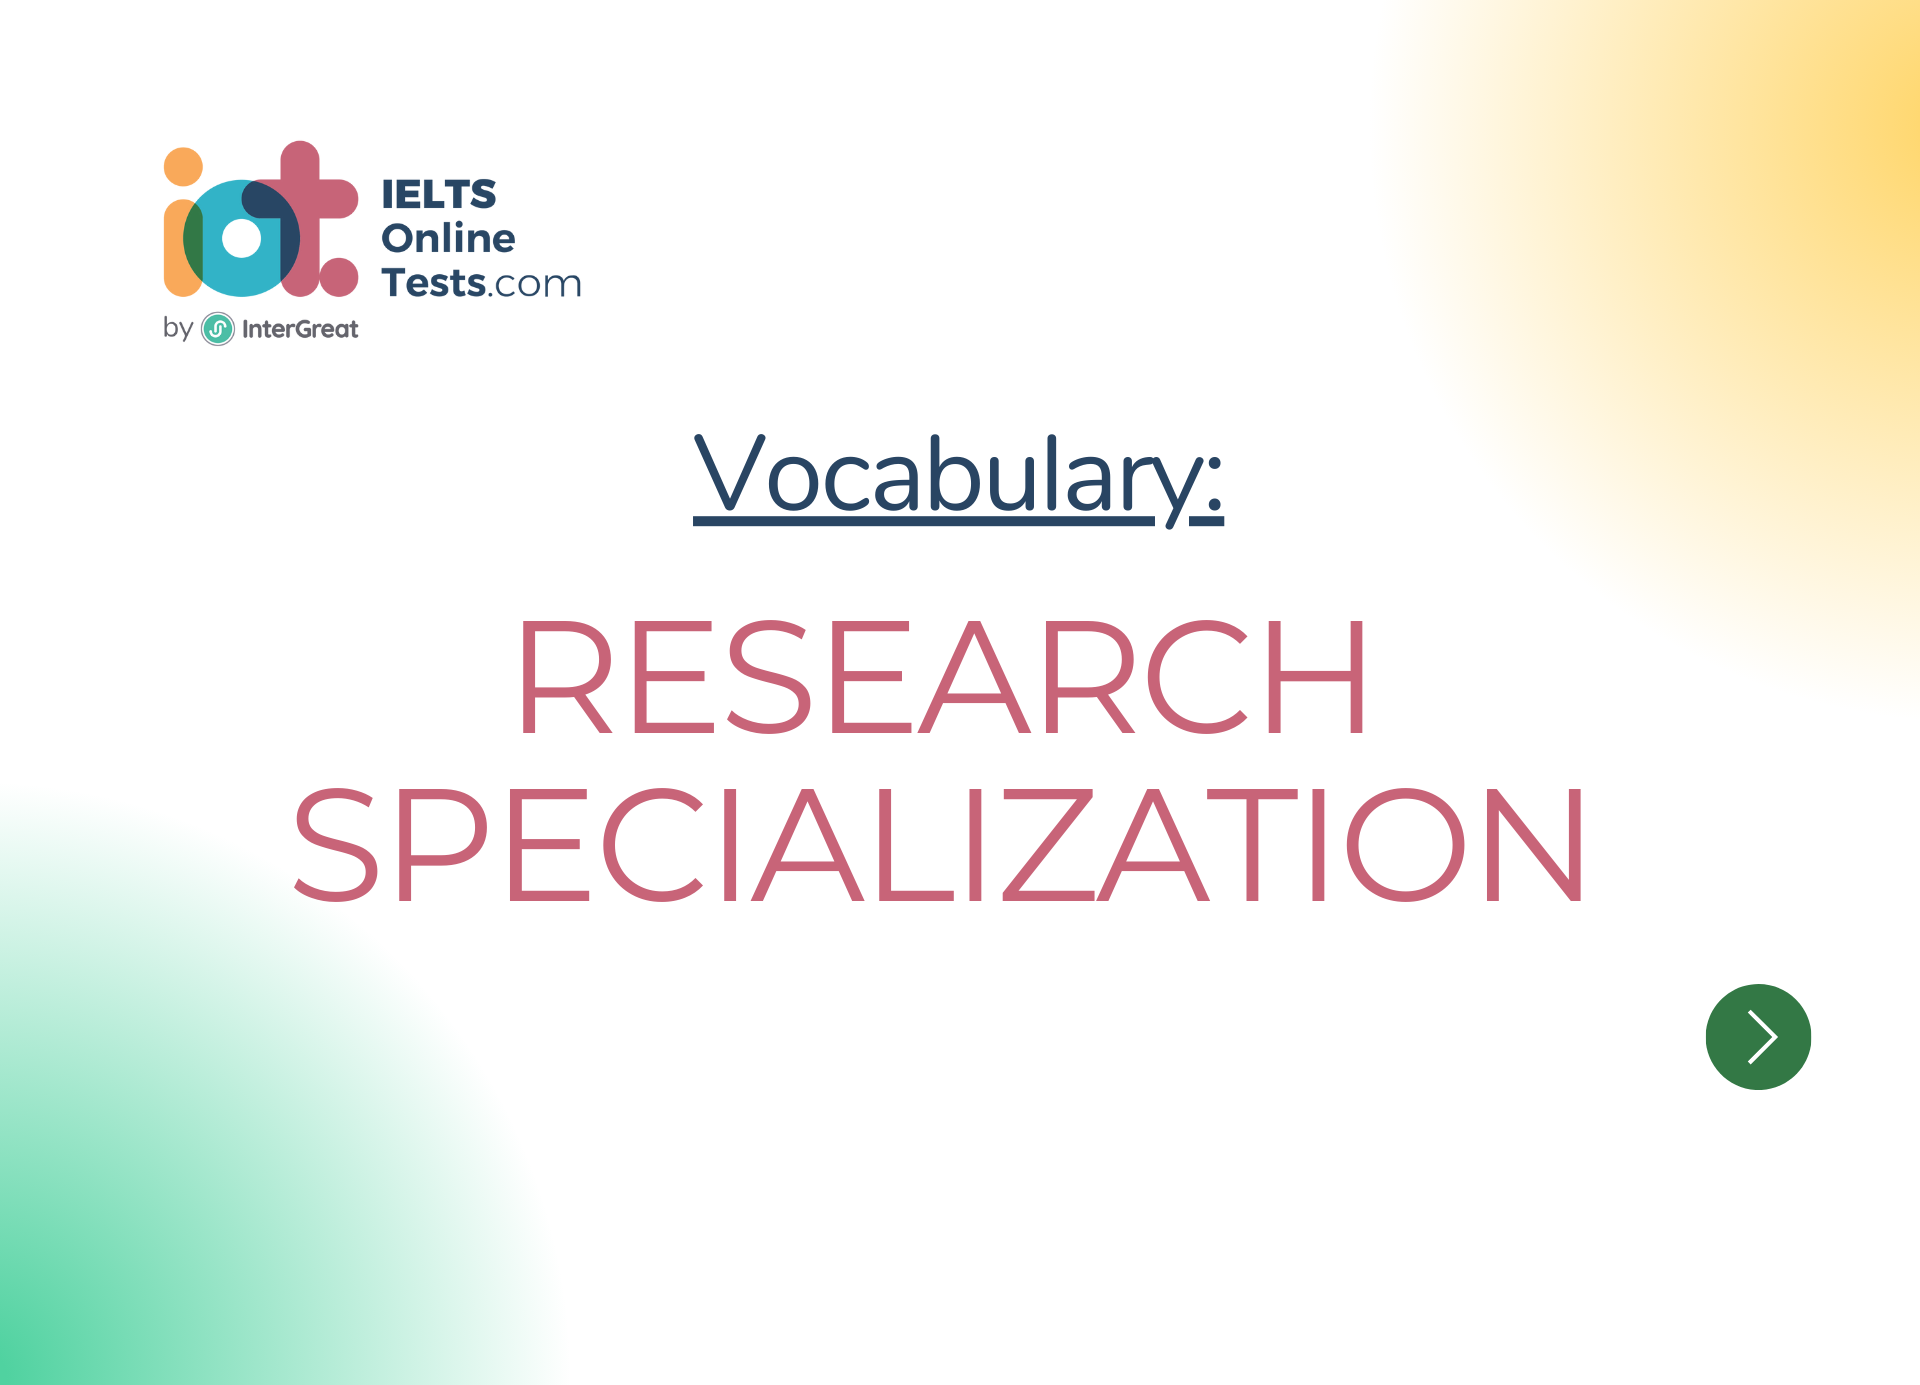 Research specialization